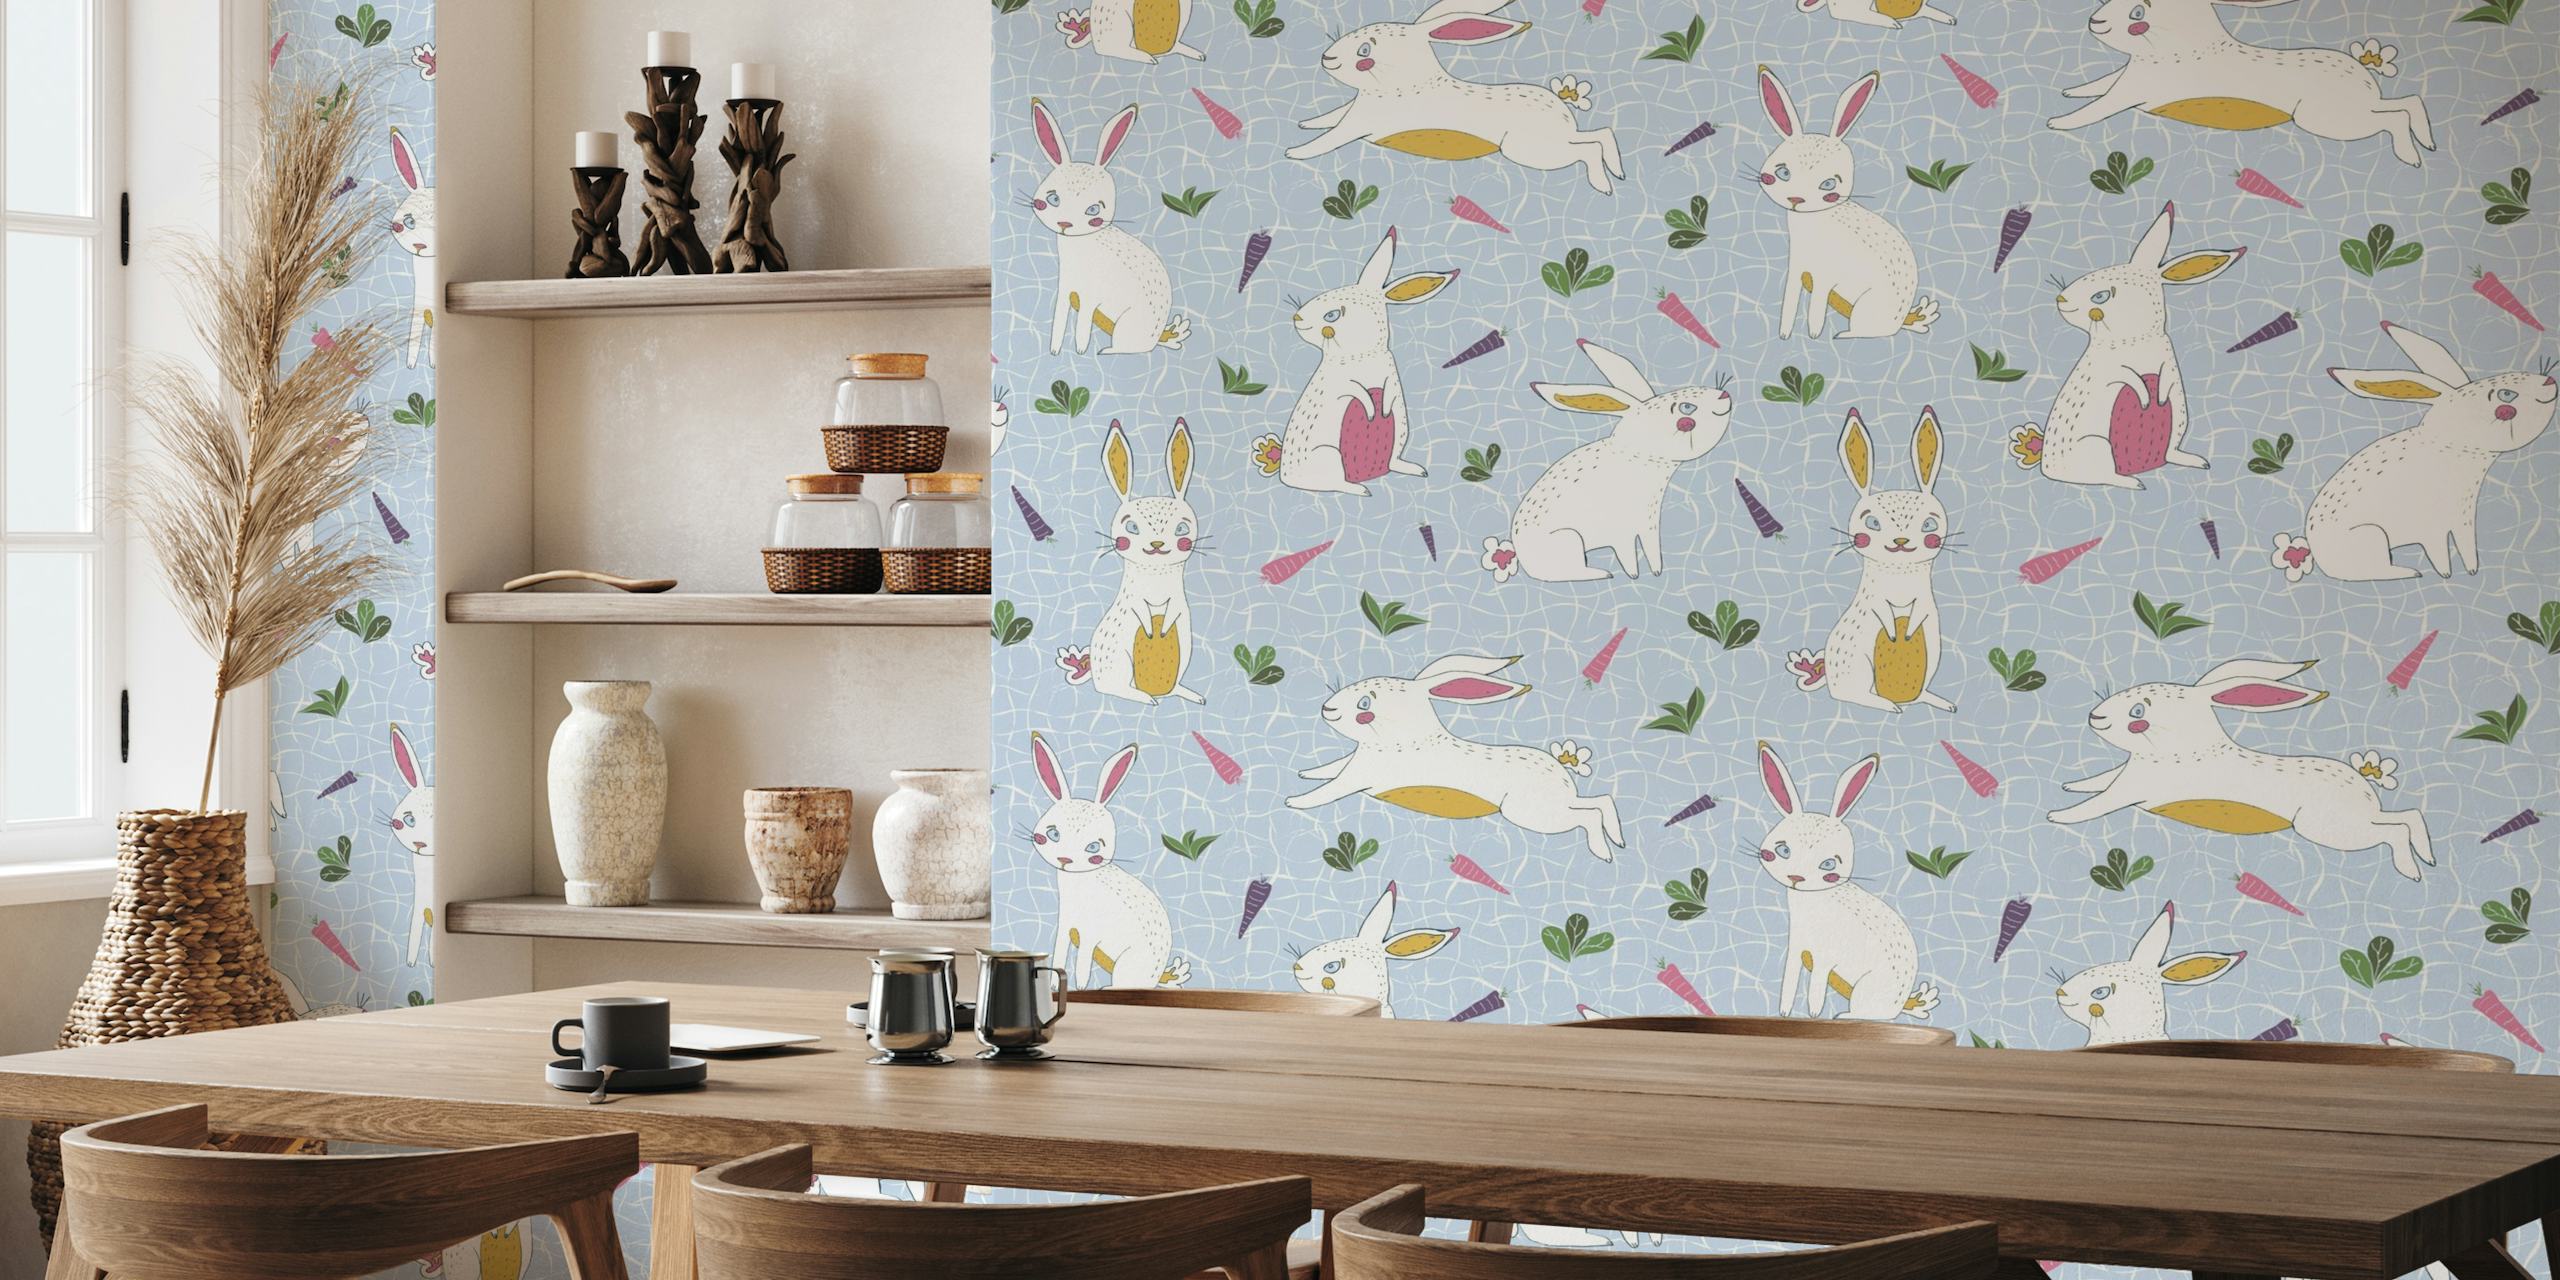 Happy bunnies playing and eating in nature wallpaper